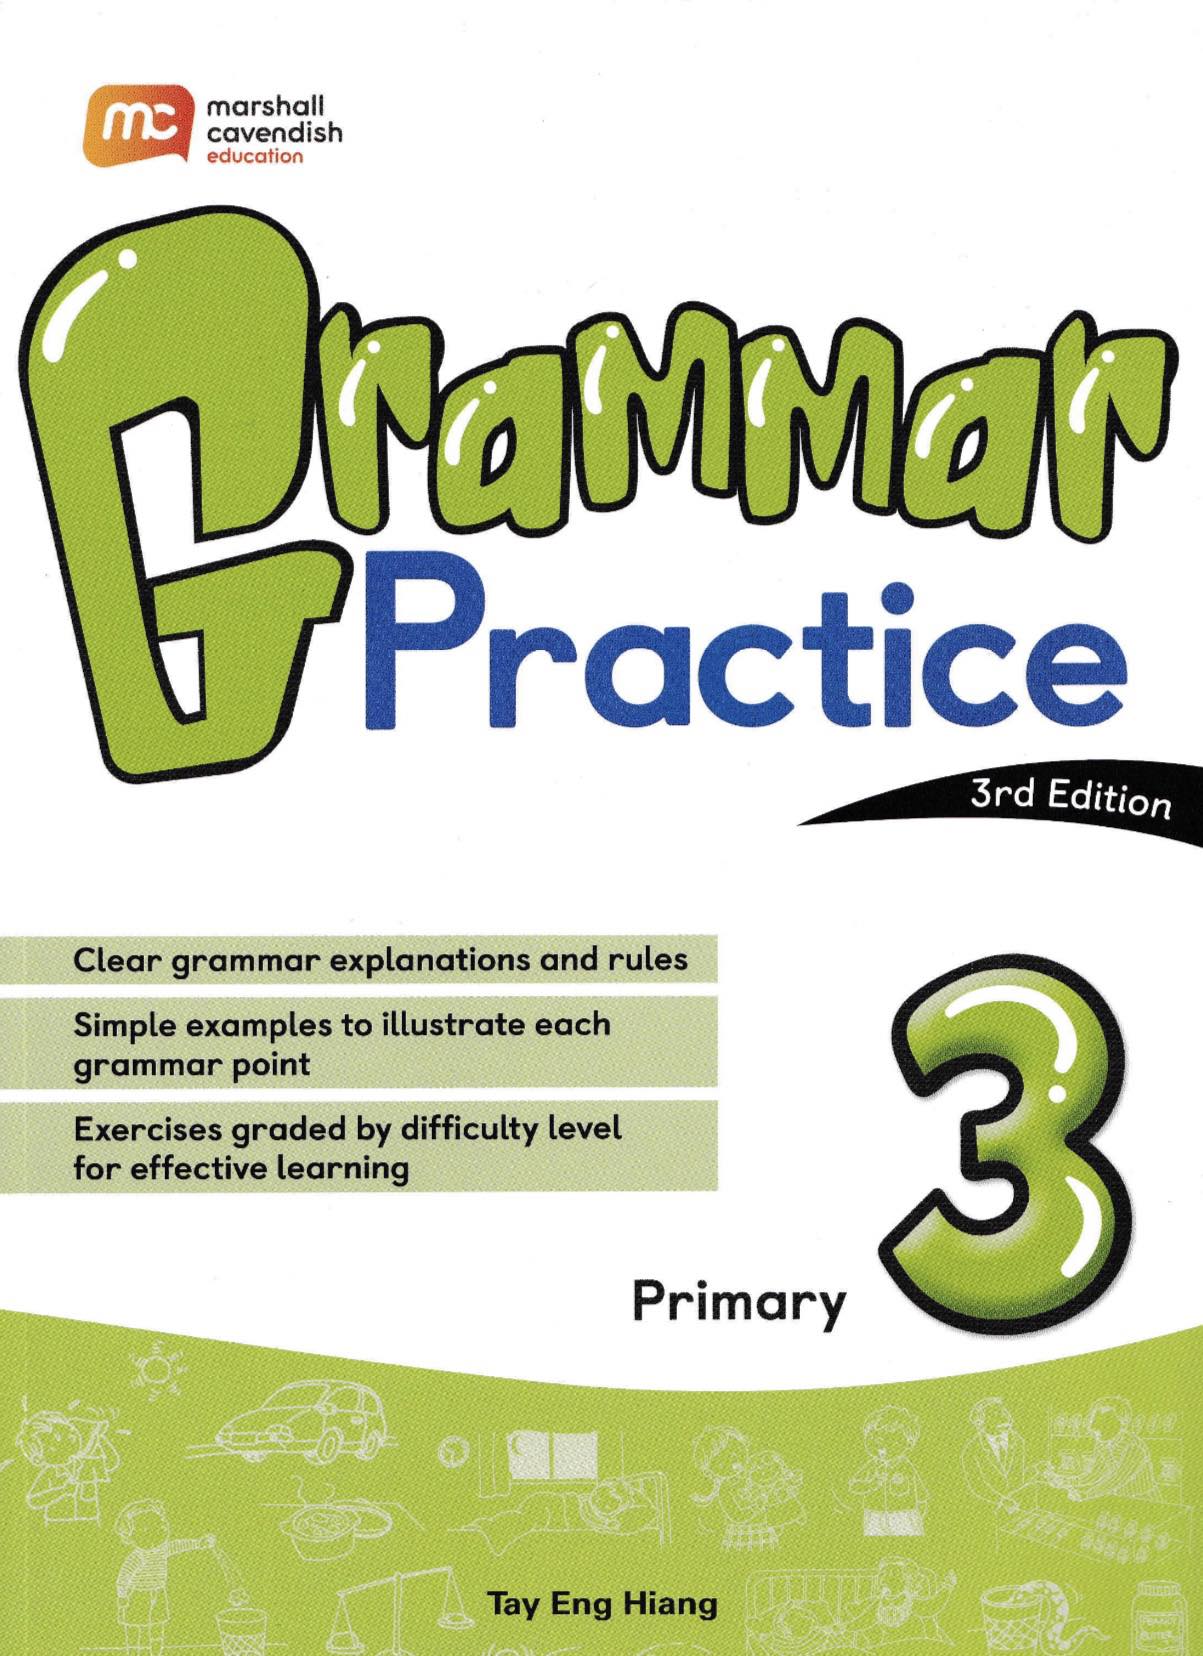 Grammar Practice 3rd Edition for Primary Levels